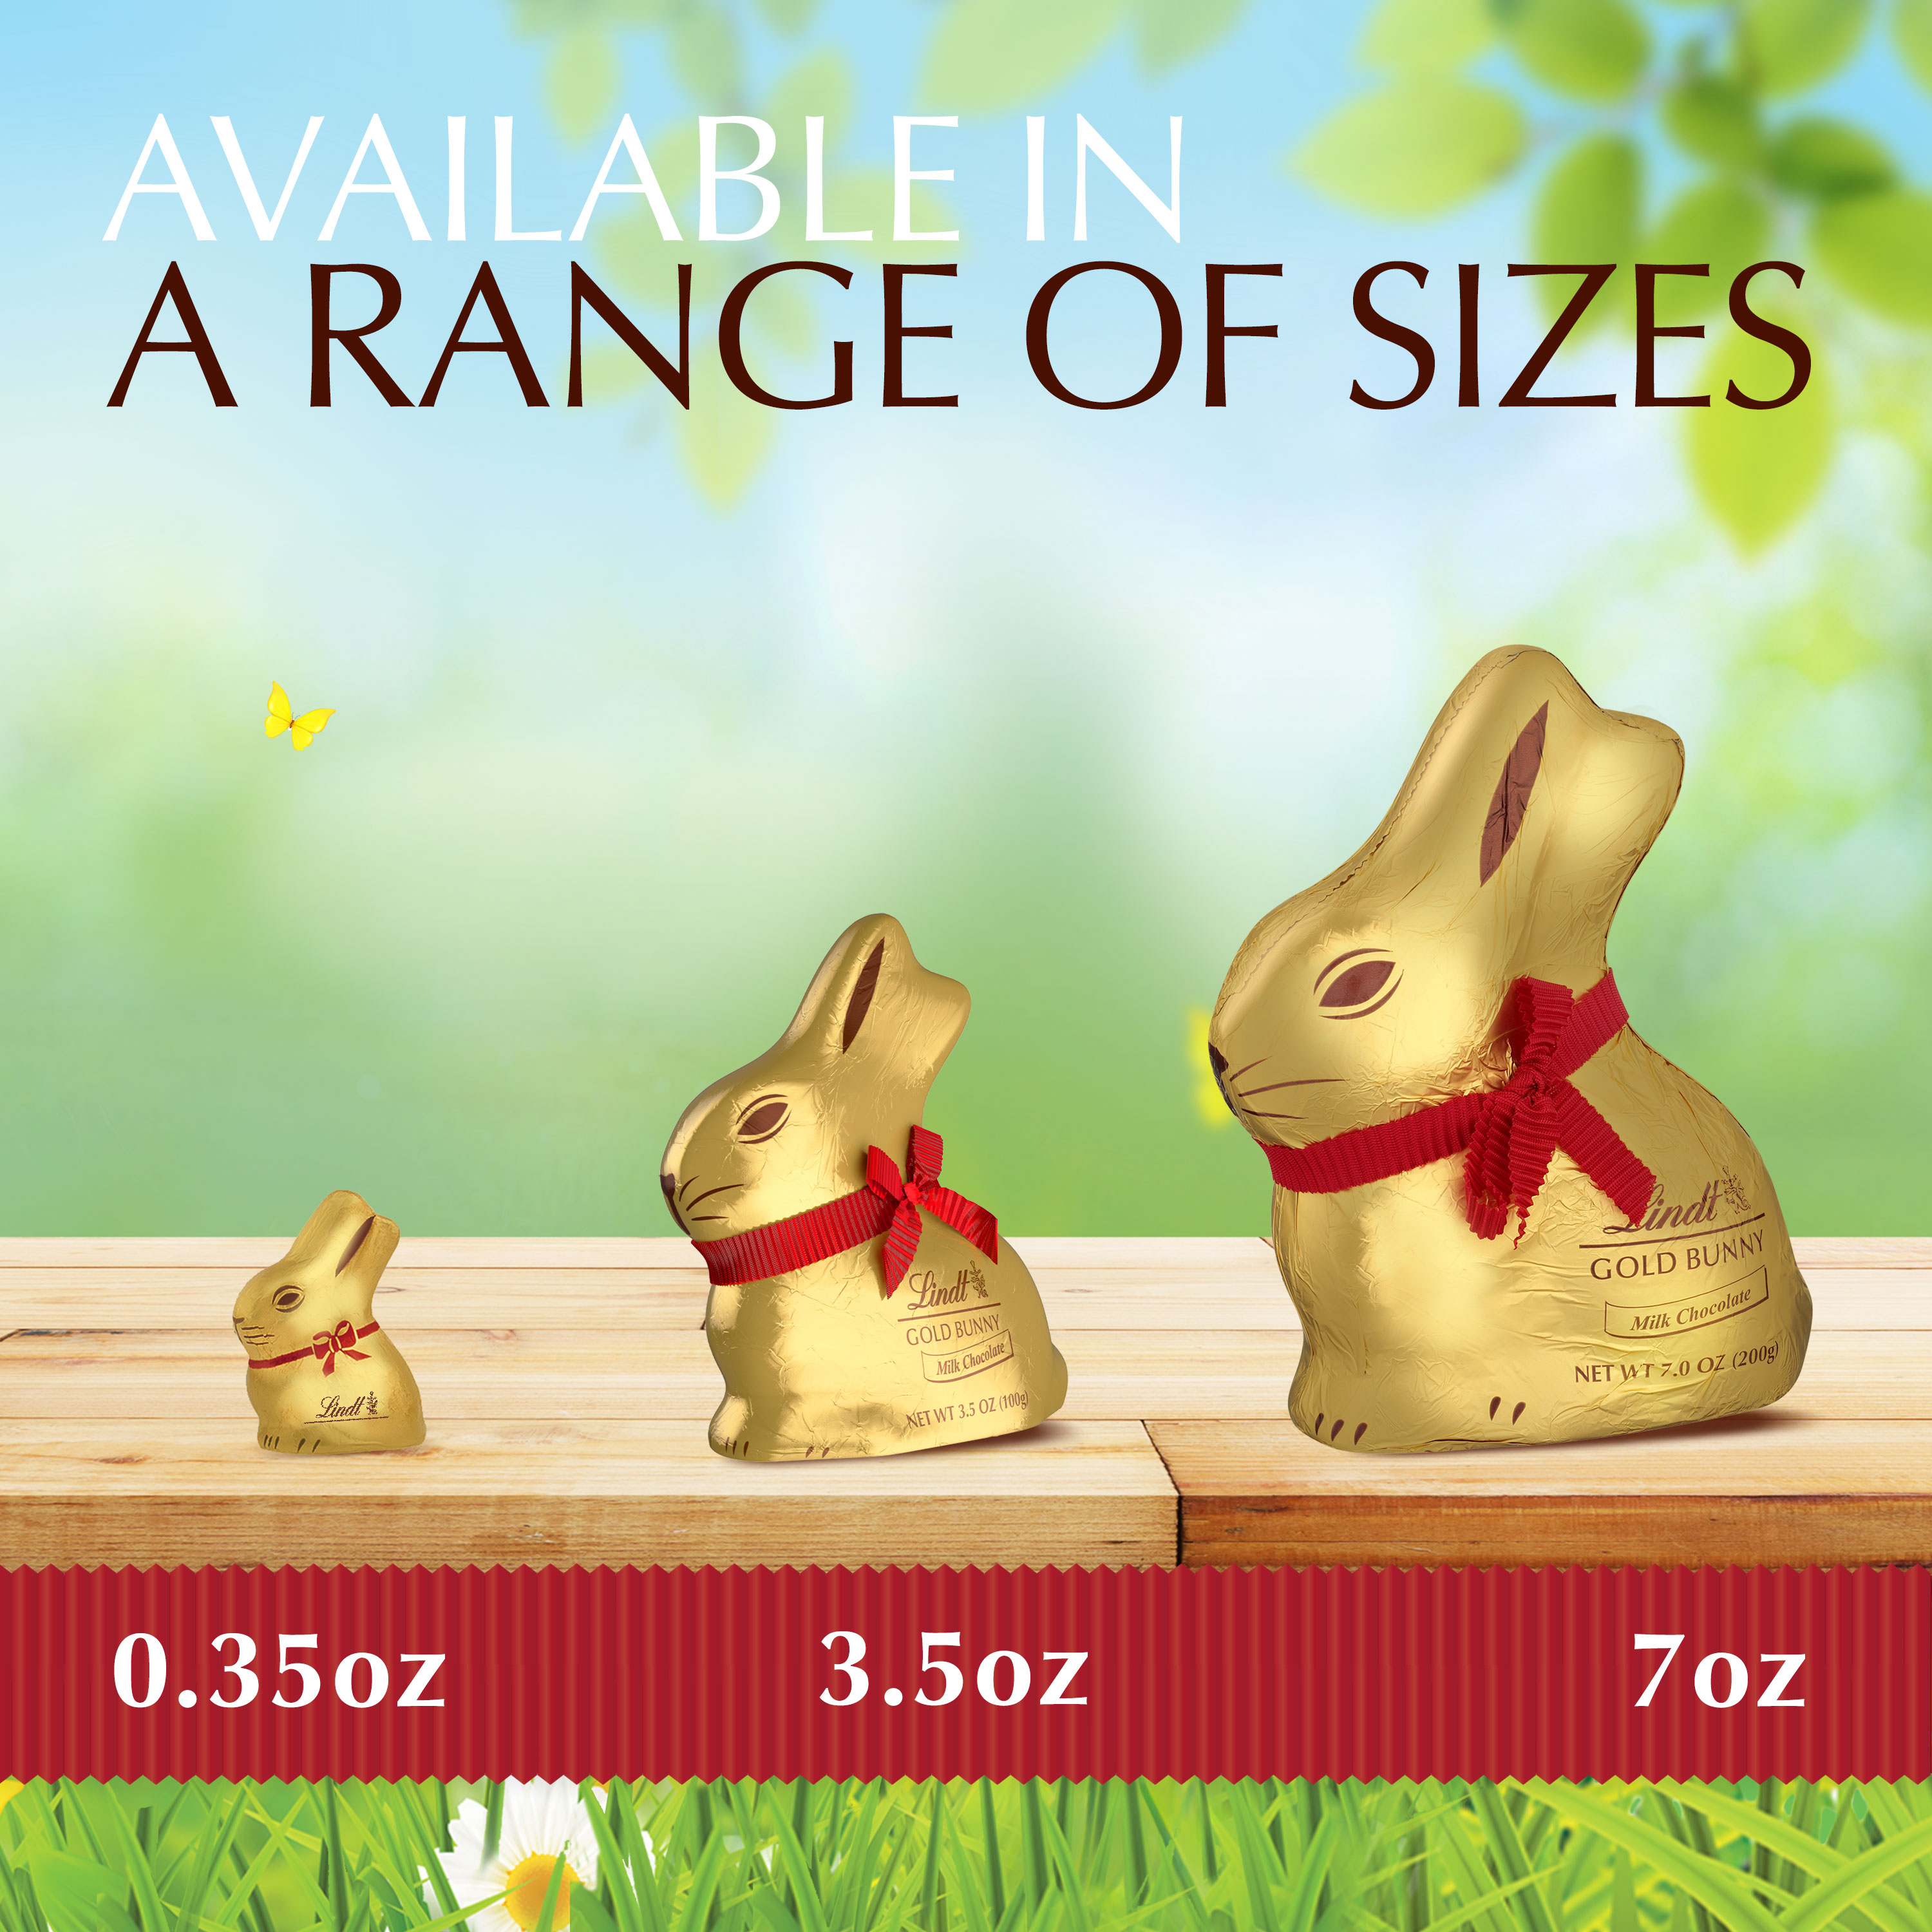 Lindt Gold Bunny, Milk Chocolate, Easter Chocolate Candy Bunny, 3.5 oz, 1 Count - image 5 of 12